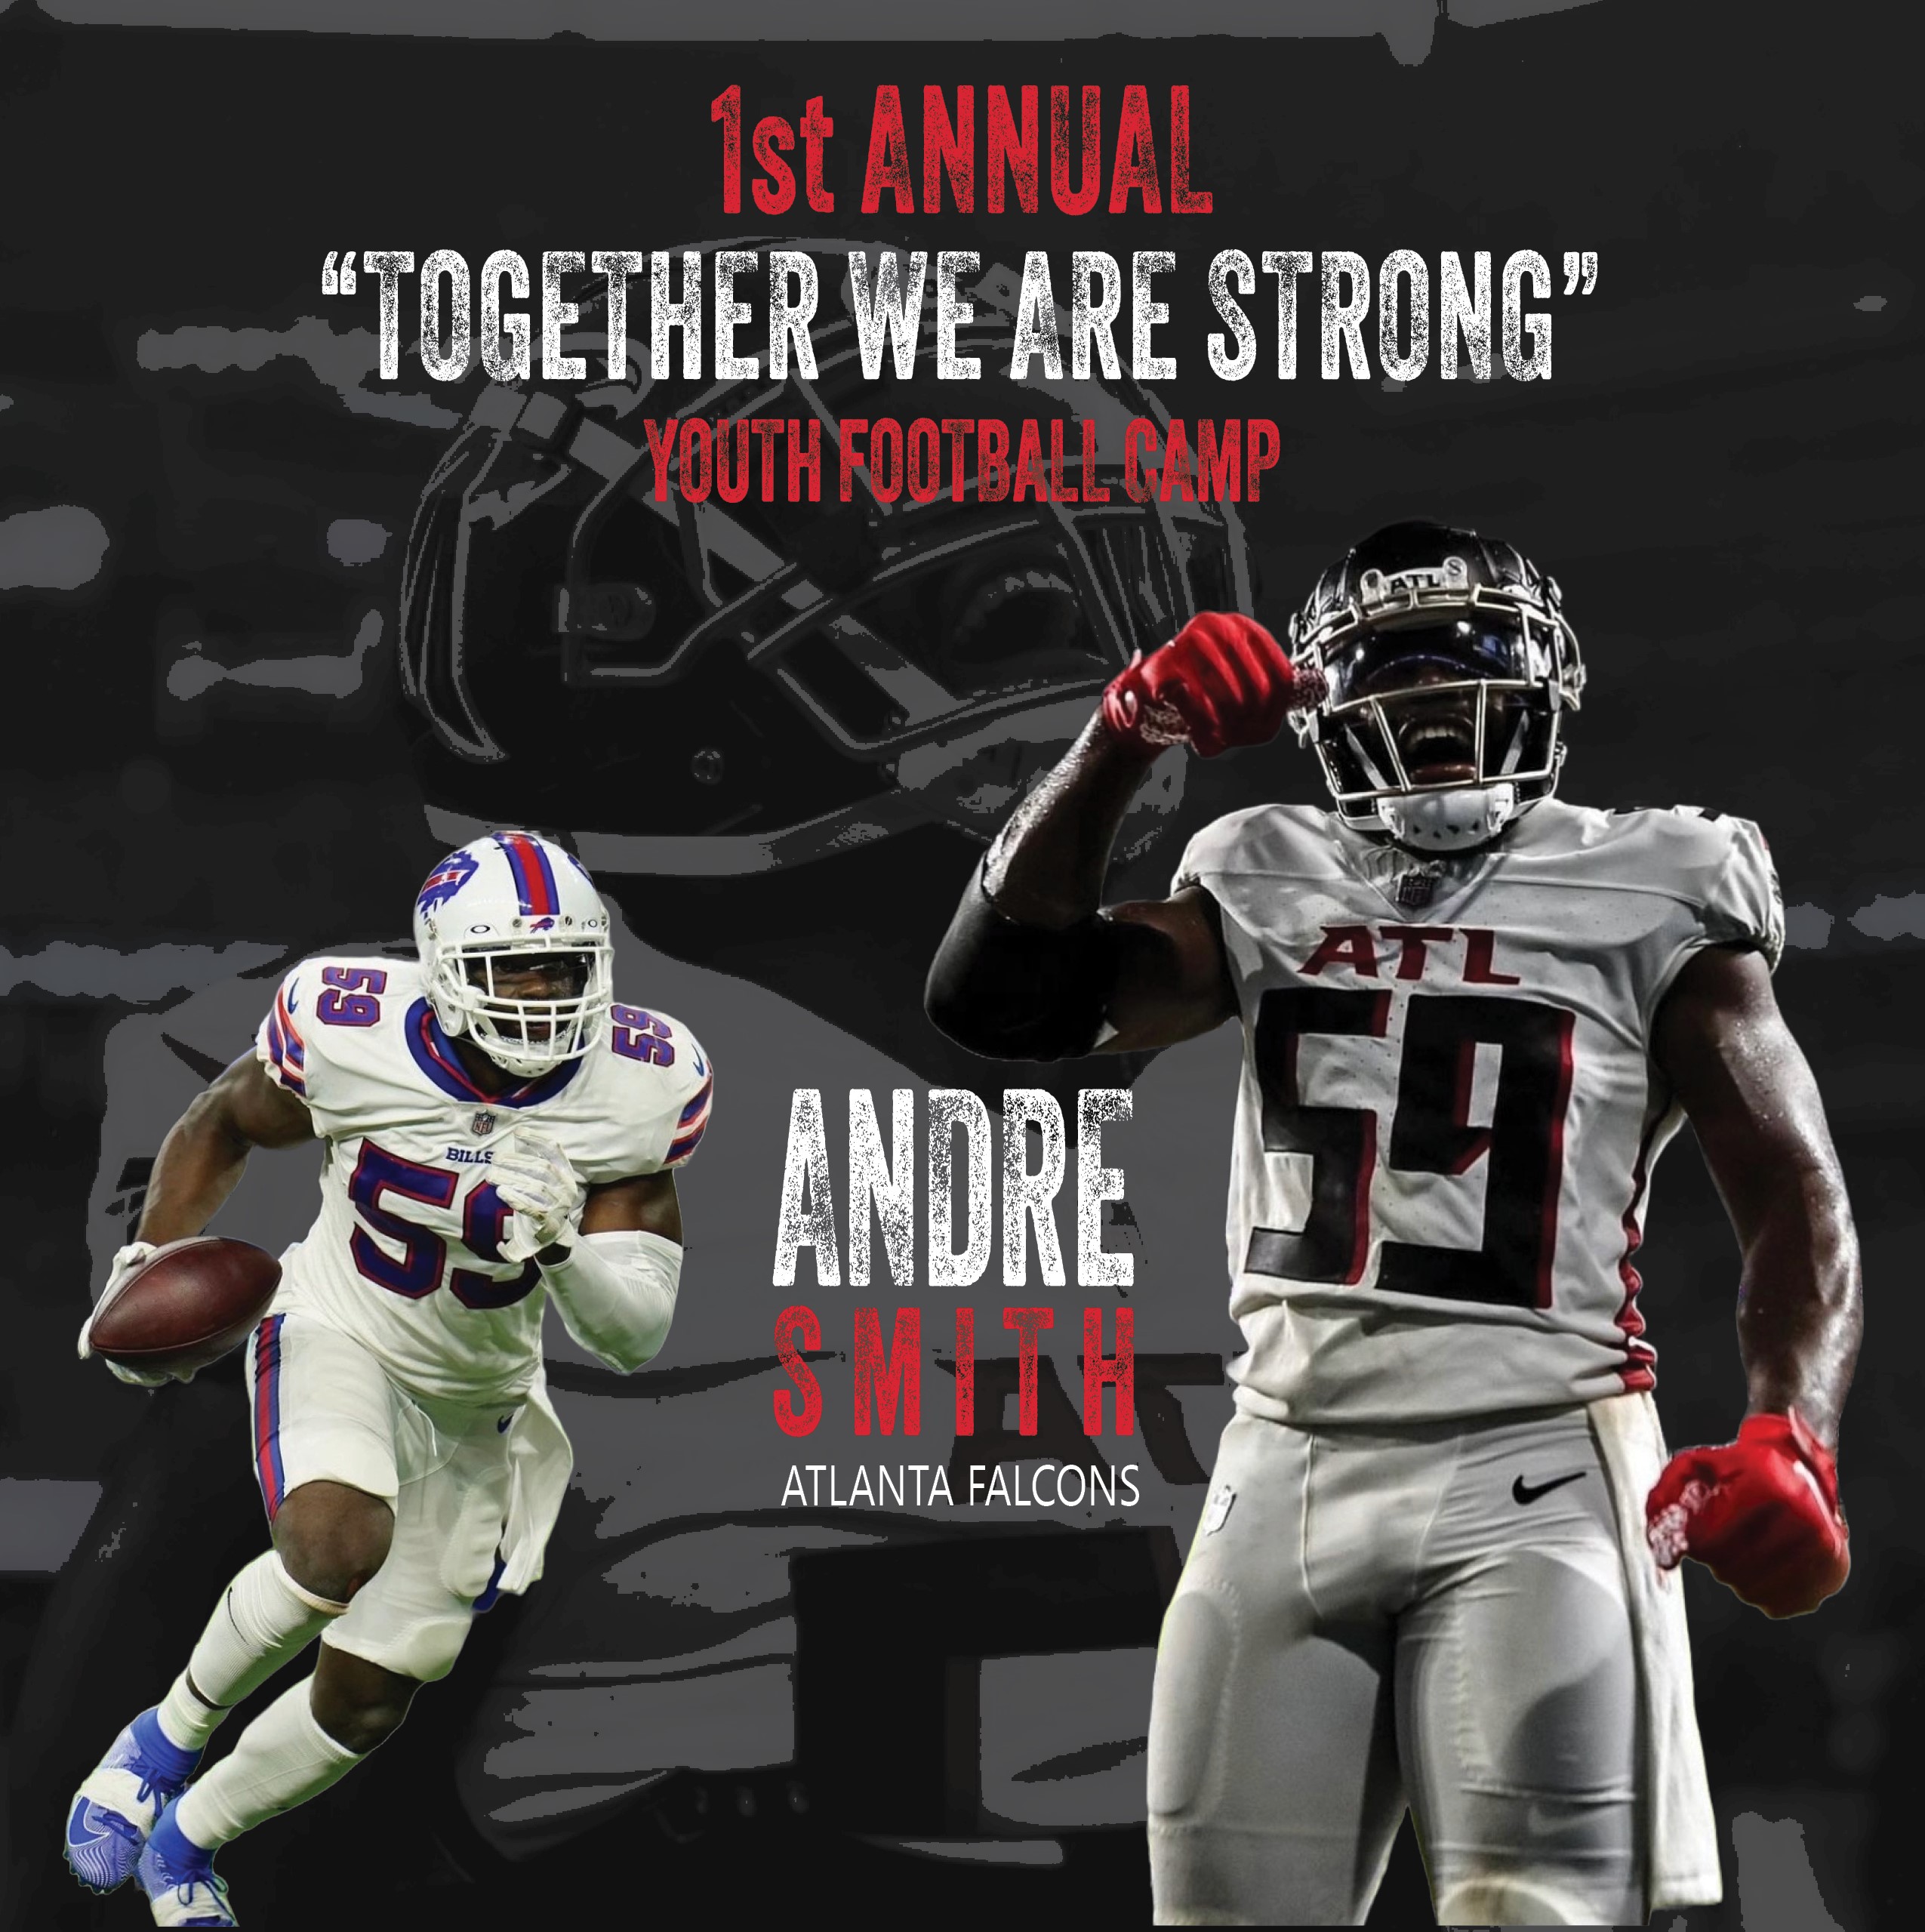 1st Annual TOGETHER WE ARE STRONG Youth Football